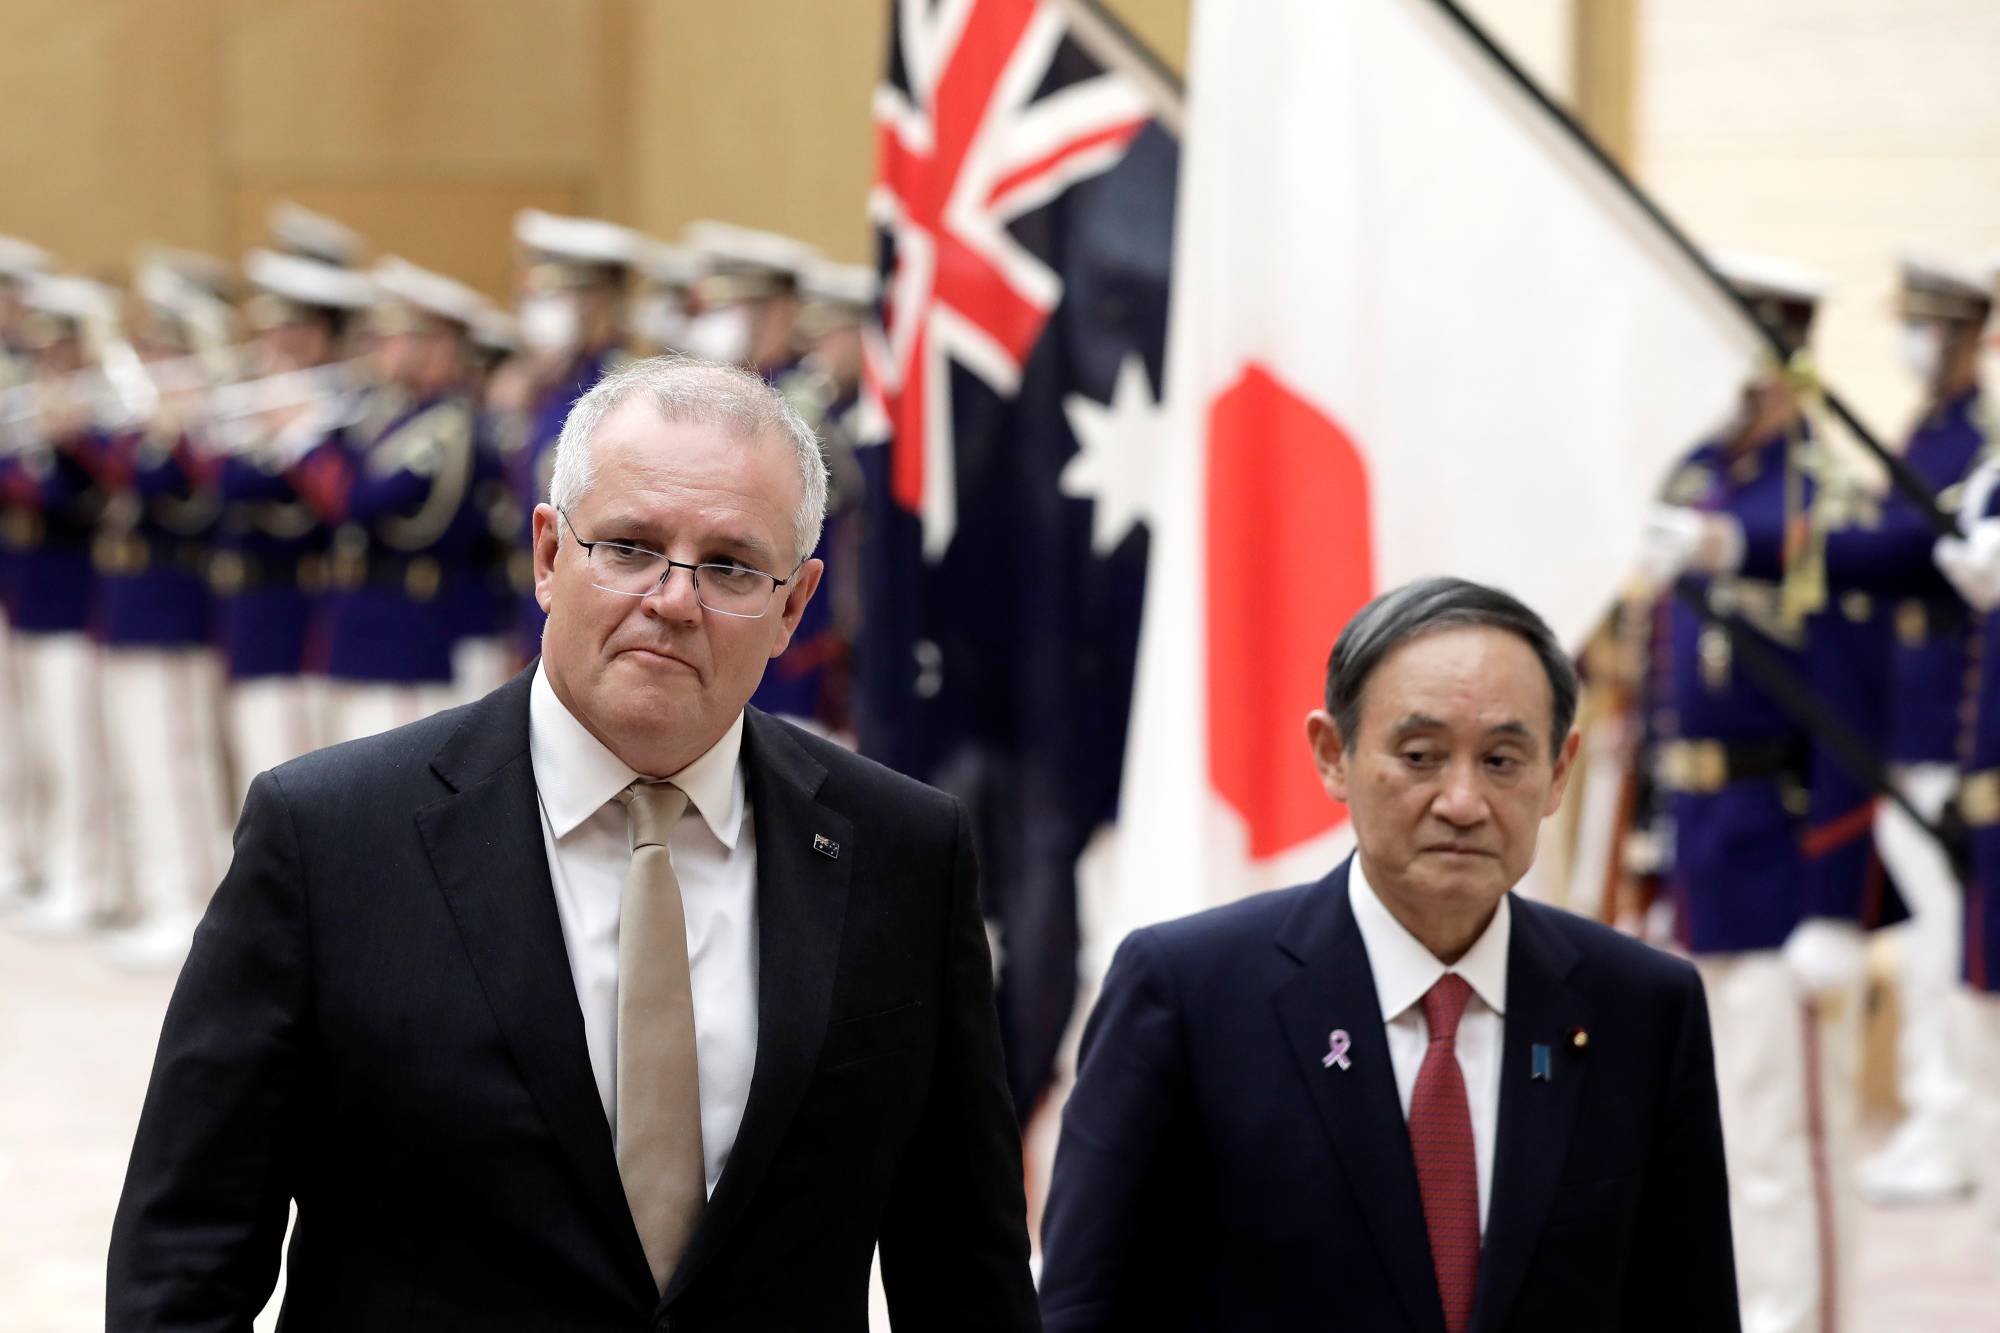 Australian Prime Minister Scott Morrison met with Prime Minister Yoshihide Suga in person last Nov. 17 during his first overseas trip to Tokyo following the start of the COVID-19 pandemic. | POOL / VIA REUTERS